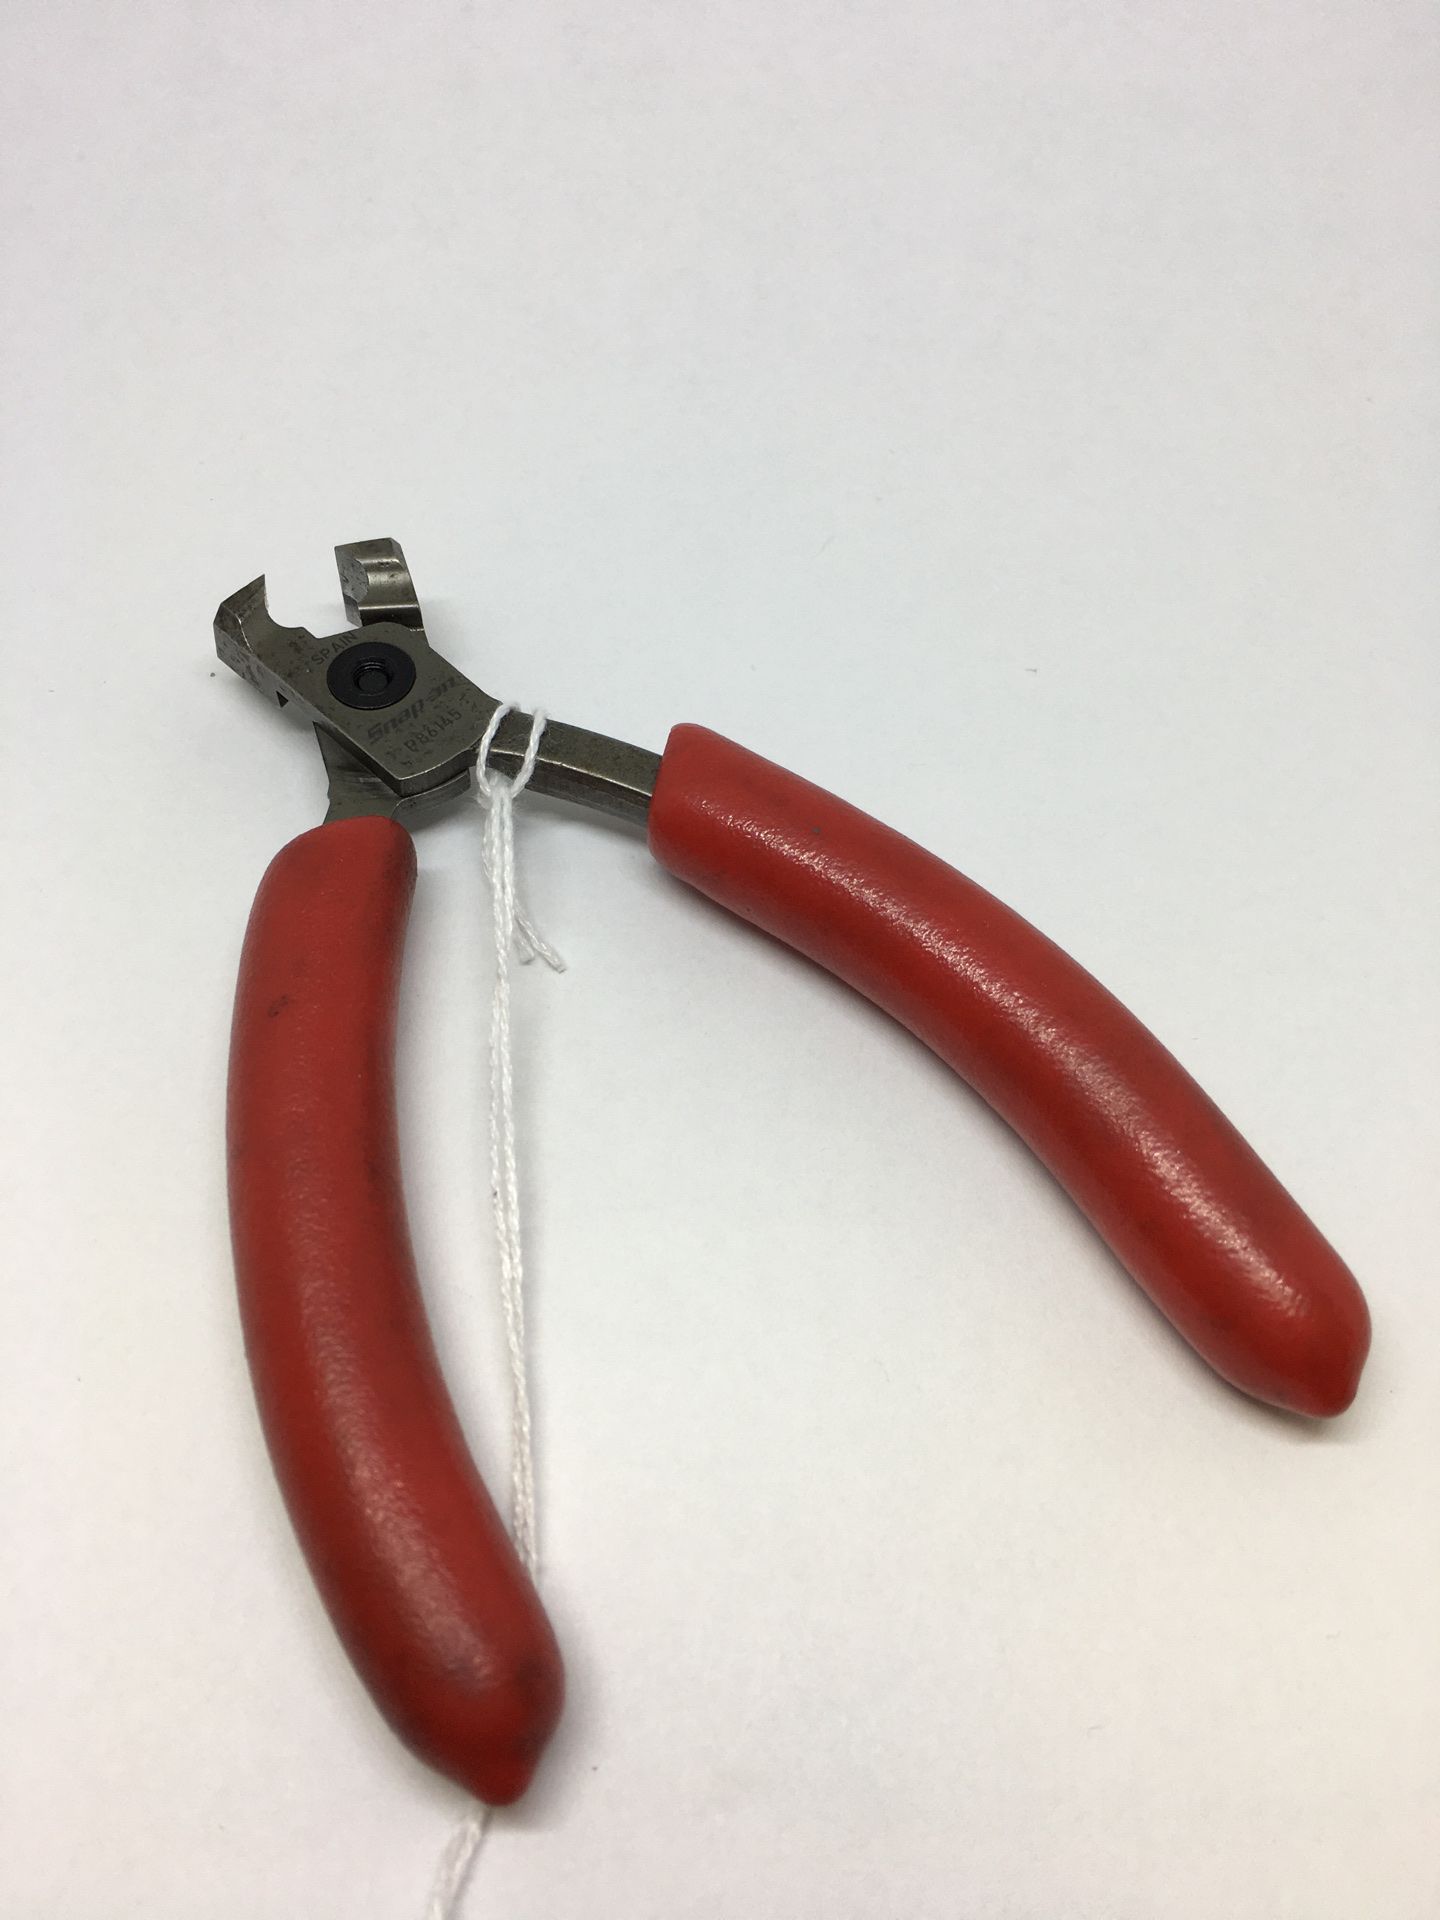 Snap-on pliers tools industrial hardware P86145 BCP006283